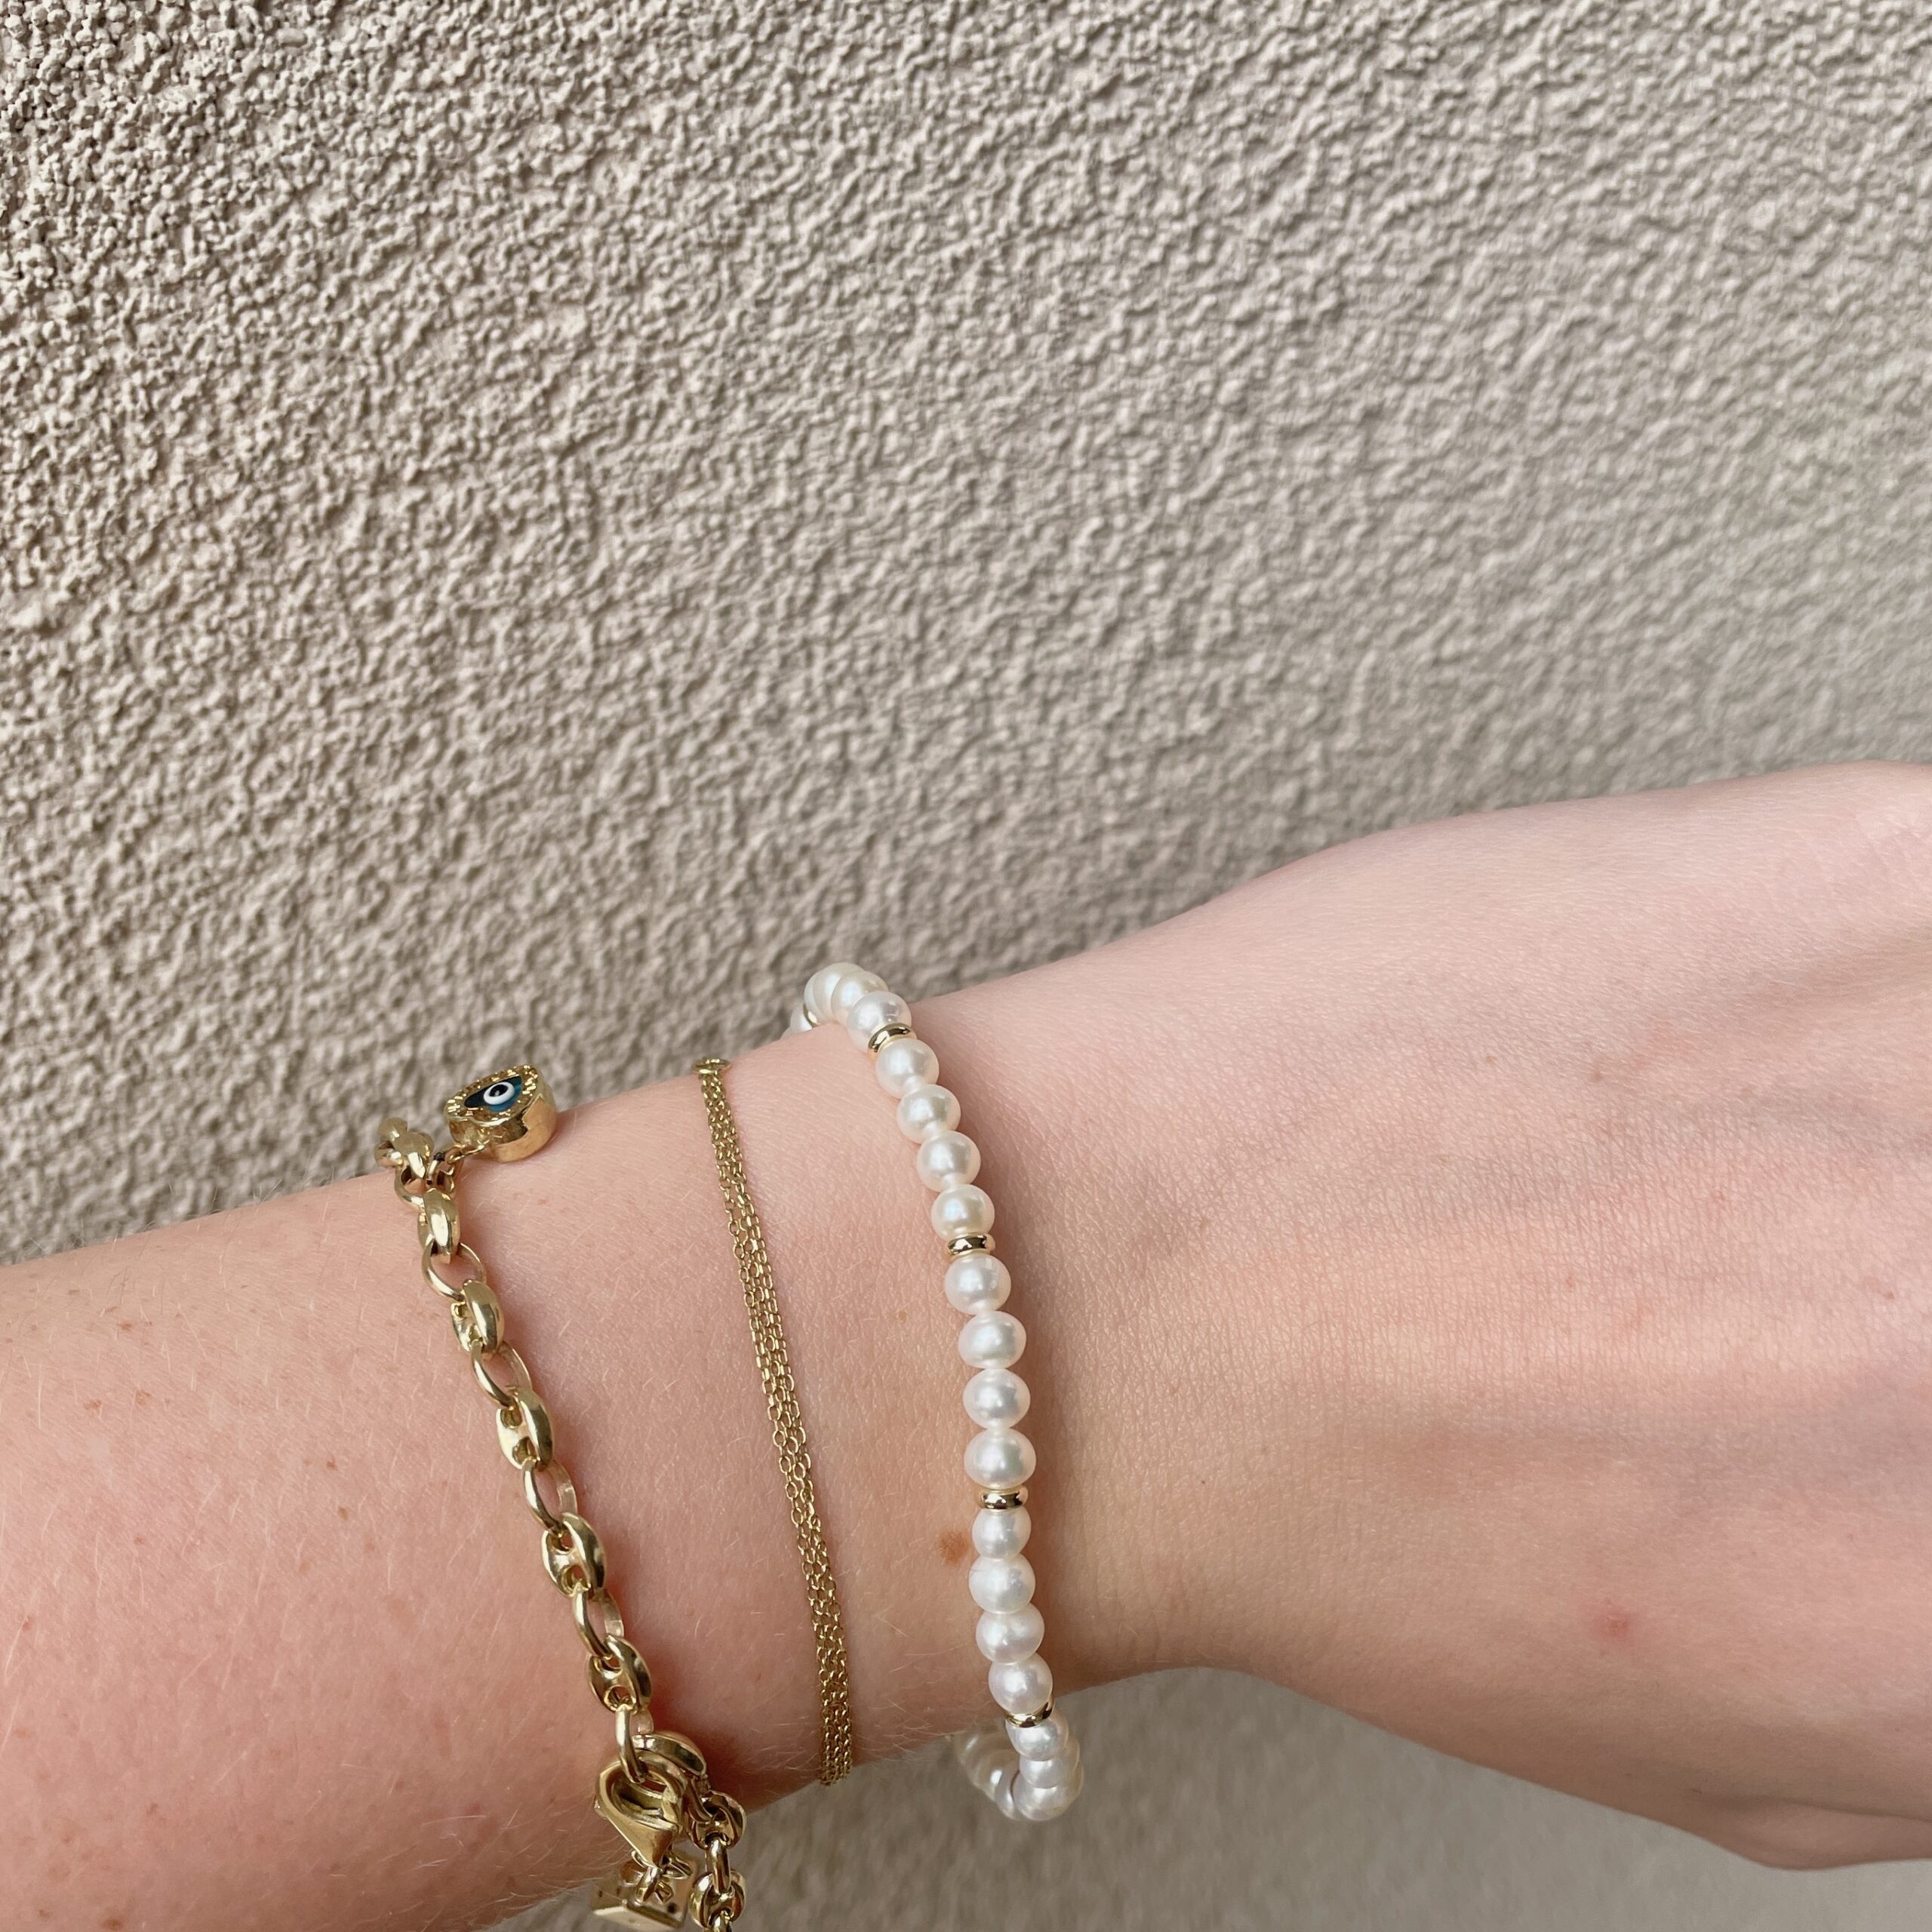 Yellow Gold Bead and Freshwater Pearl Row Bracelet